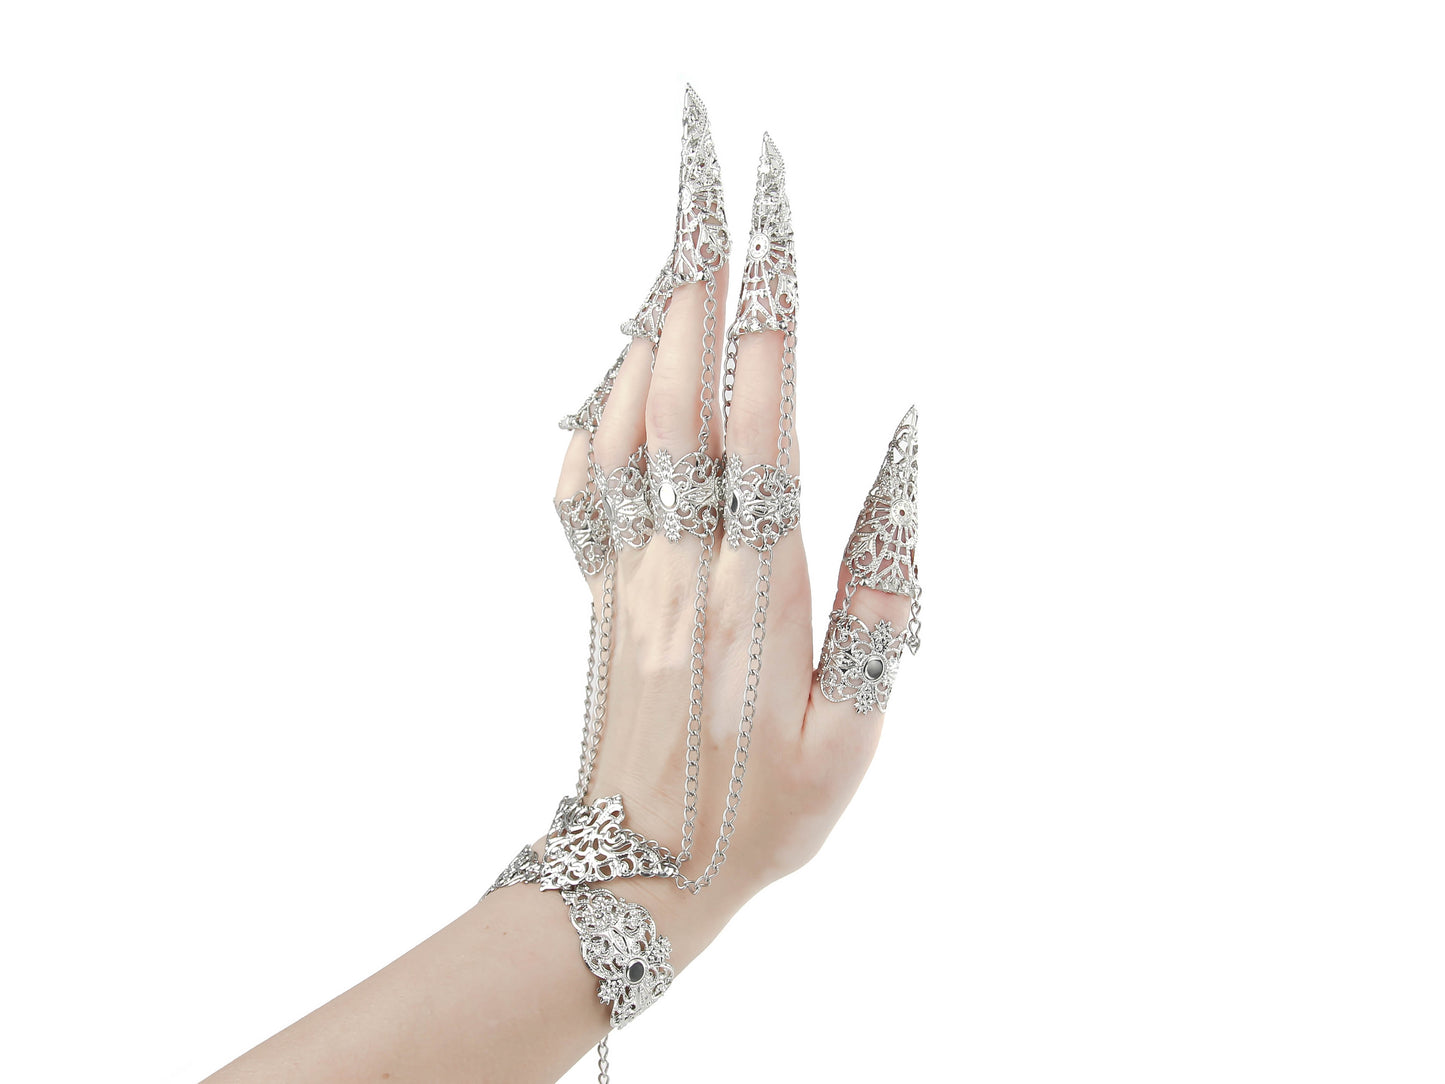 A hand adorned with silver claw rings and chain-linked full finger armor rings, showcasing a dramatic gothic jewelry style, perfect for a dark aesthetic or avant-garde fashion statement